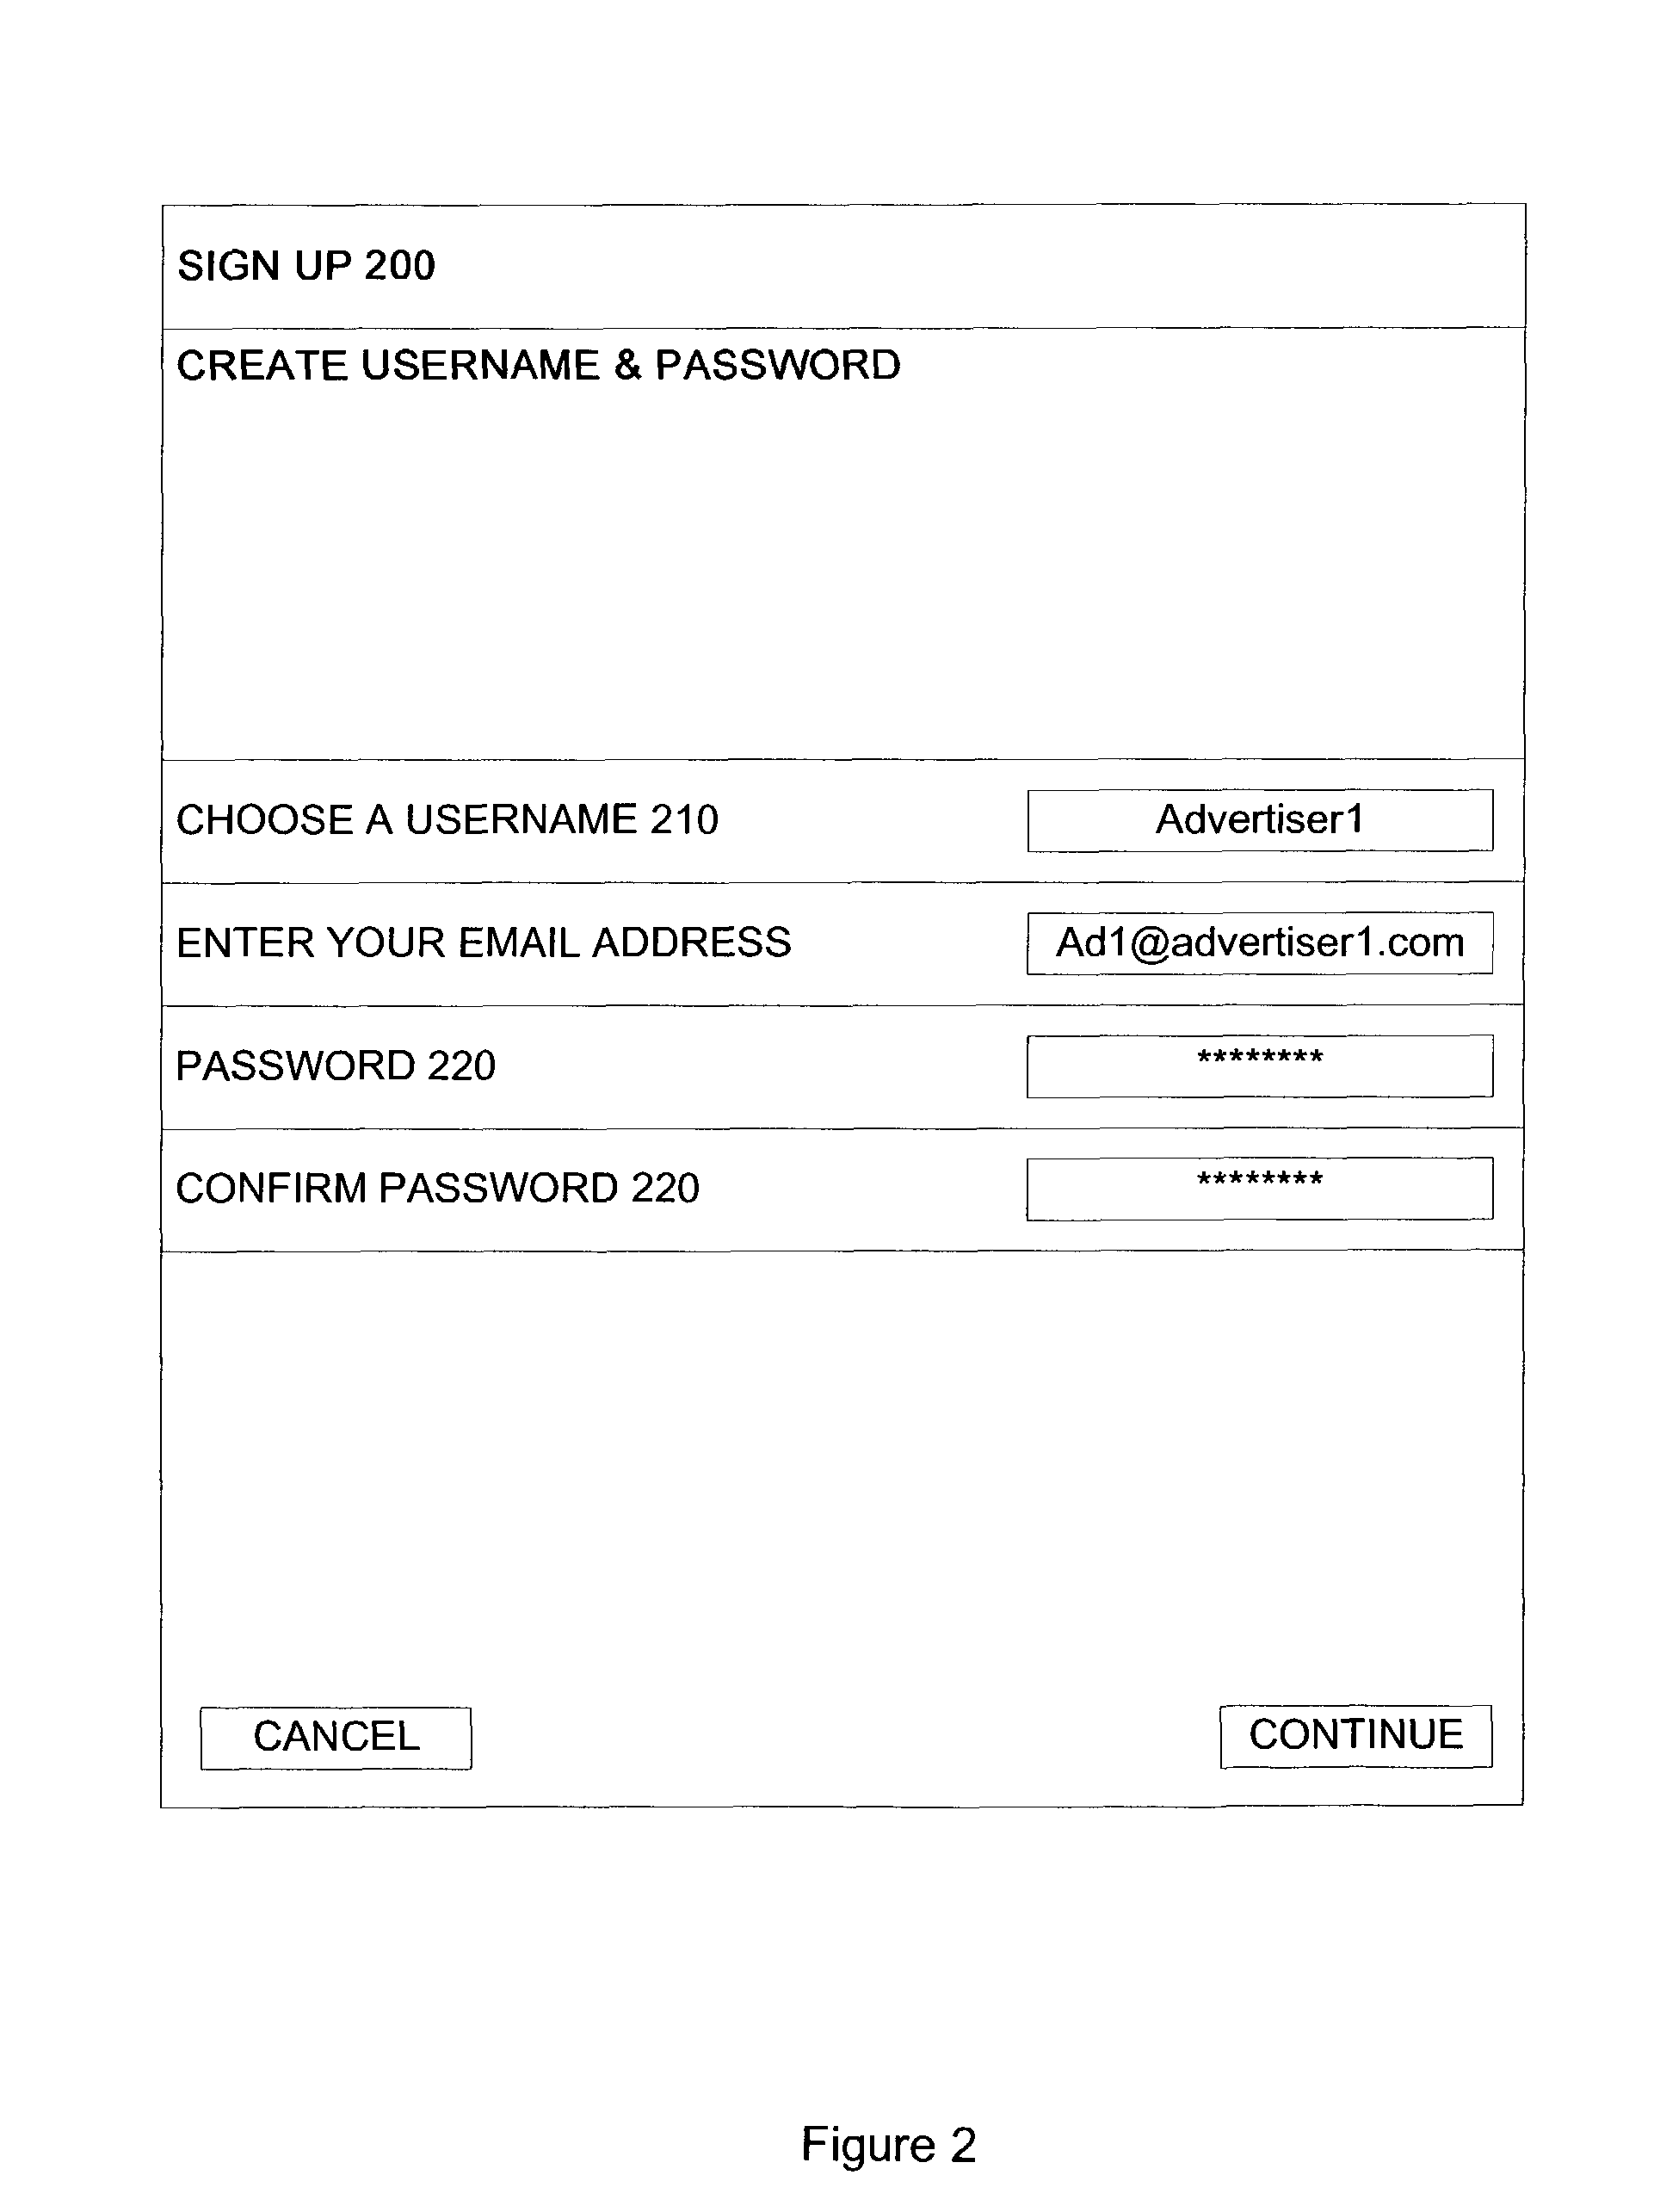 Method and system for providing advertising through content specific nodes over the internet